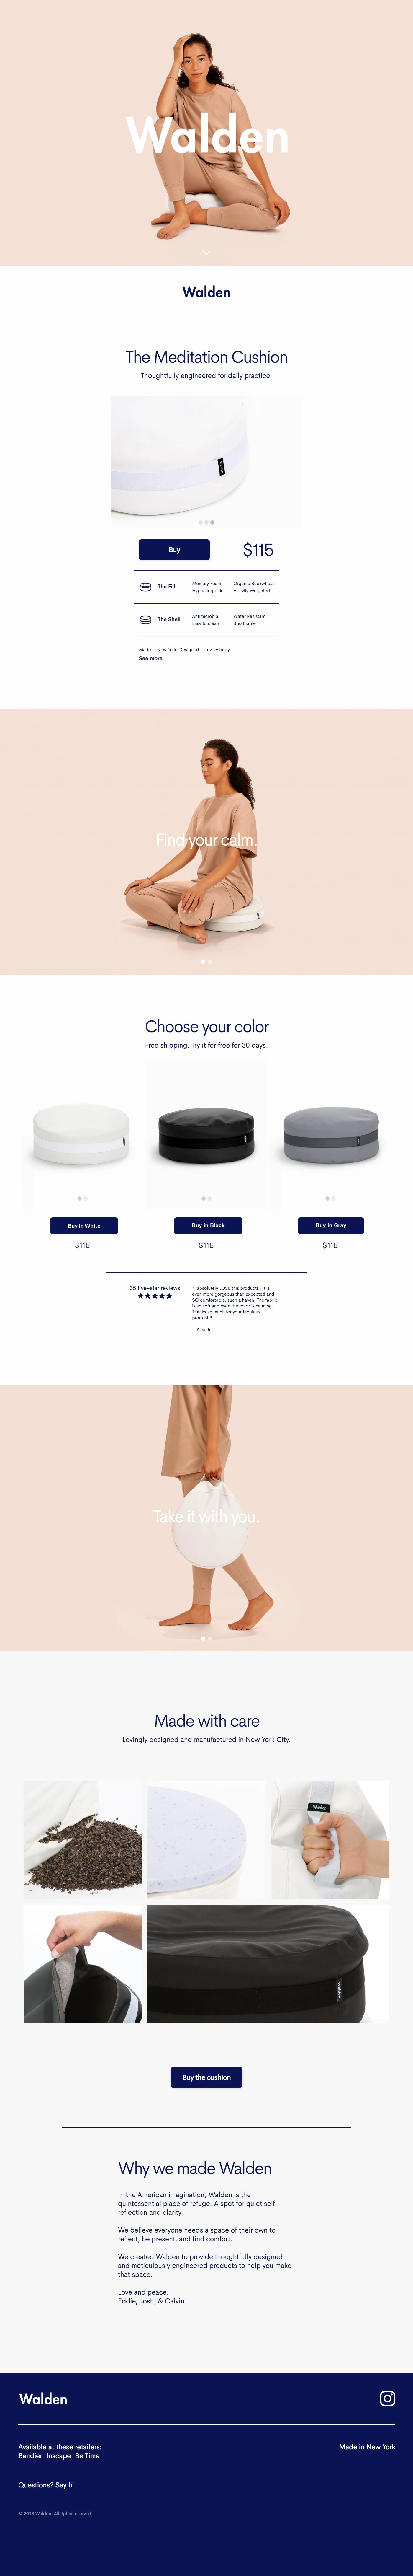 Walden Landing Page Example: A cushion that looks as good as it feels. Meticulously designed and engineered. Made with care in New York.